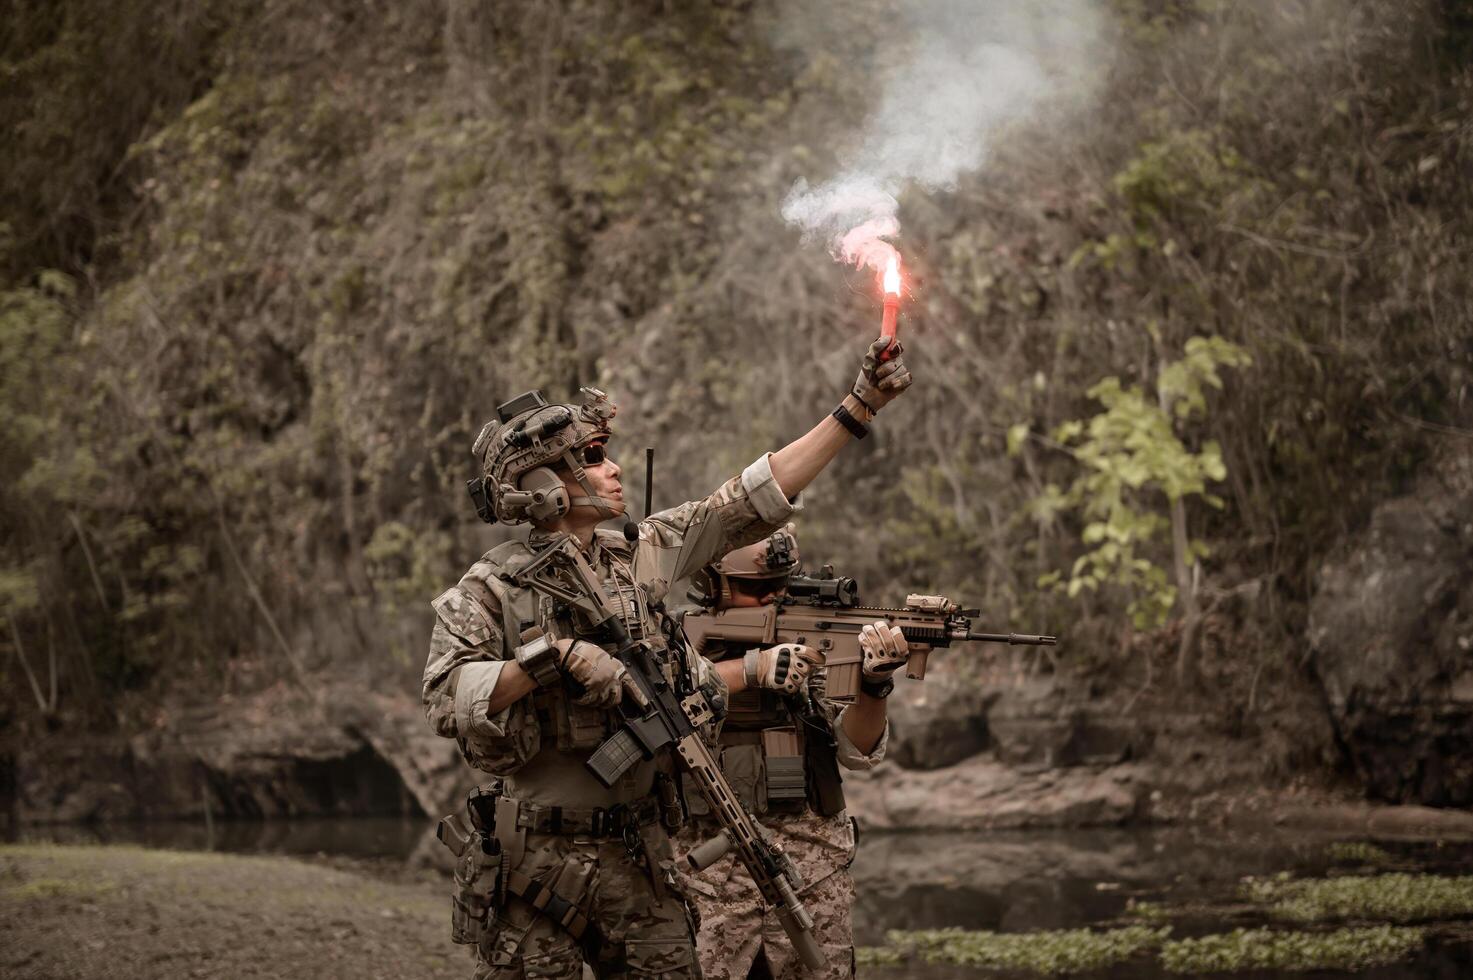 Soldiers  in camouflage uniforms aiming with their riflesready to fire during Military Operation in the forest soldiers training  in a military operation photo